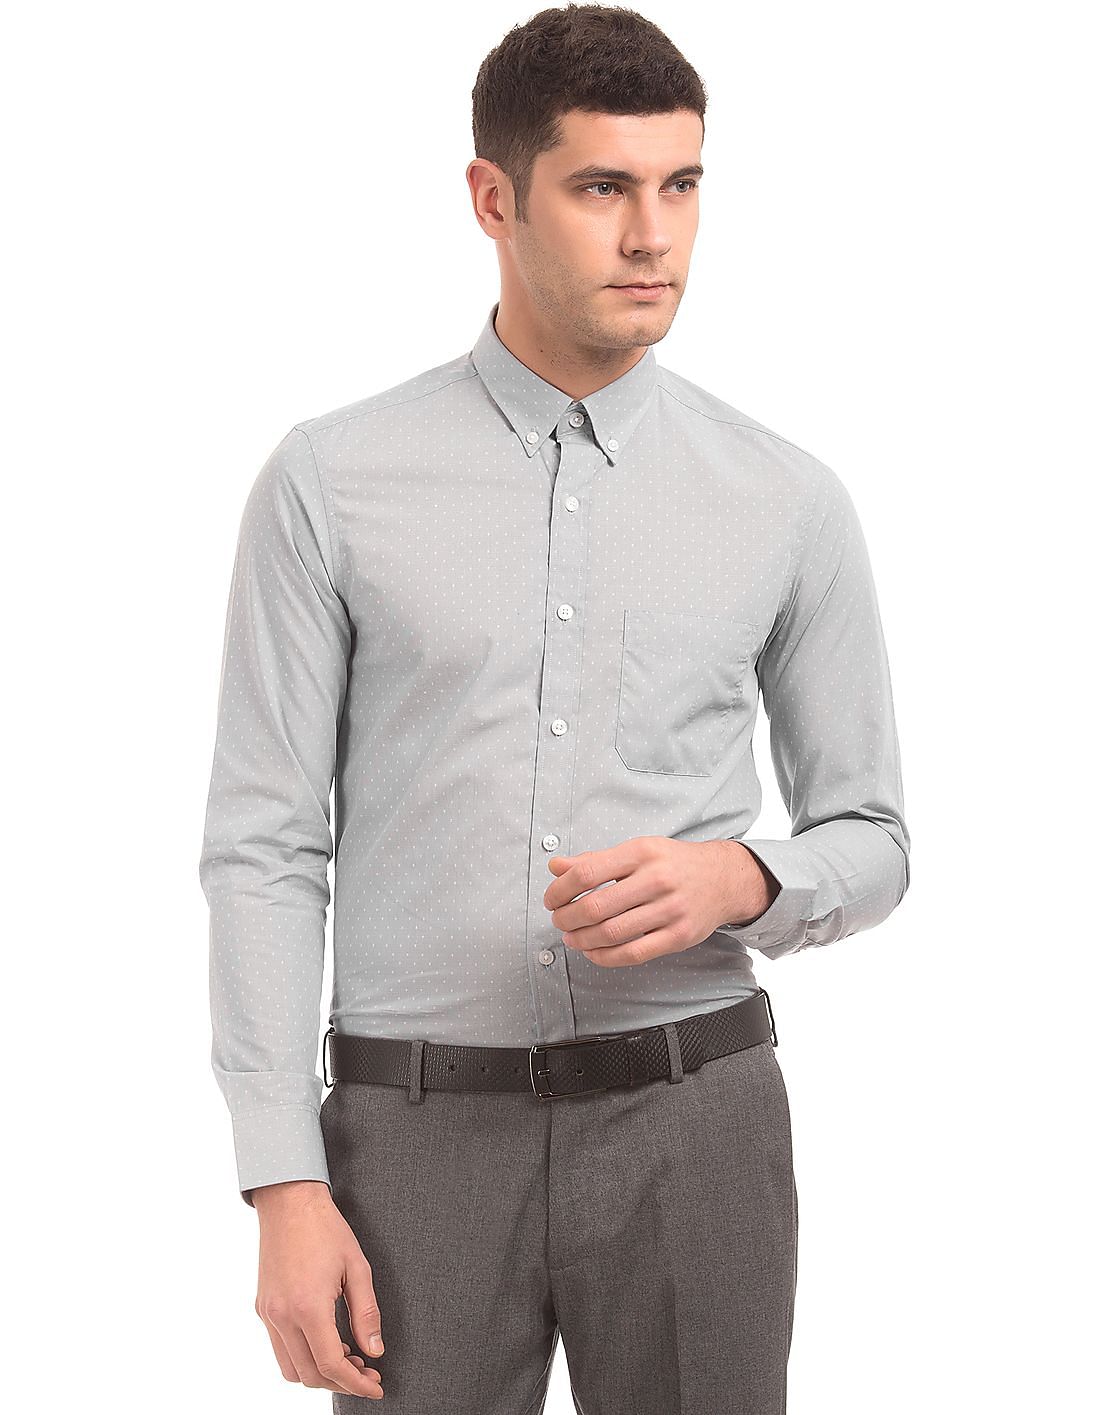 Buy USPA Tailored Men Tailored Fit Button Down Shirt - NNNOW.com